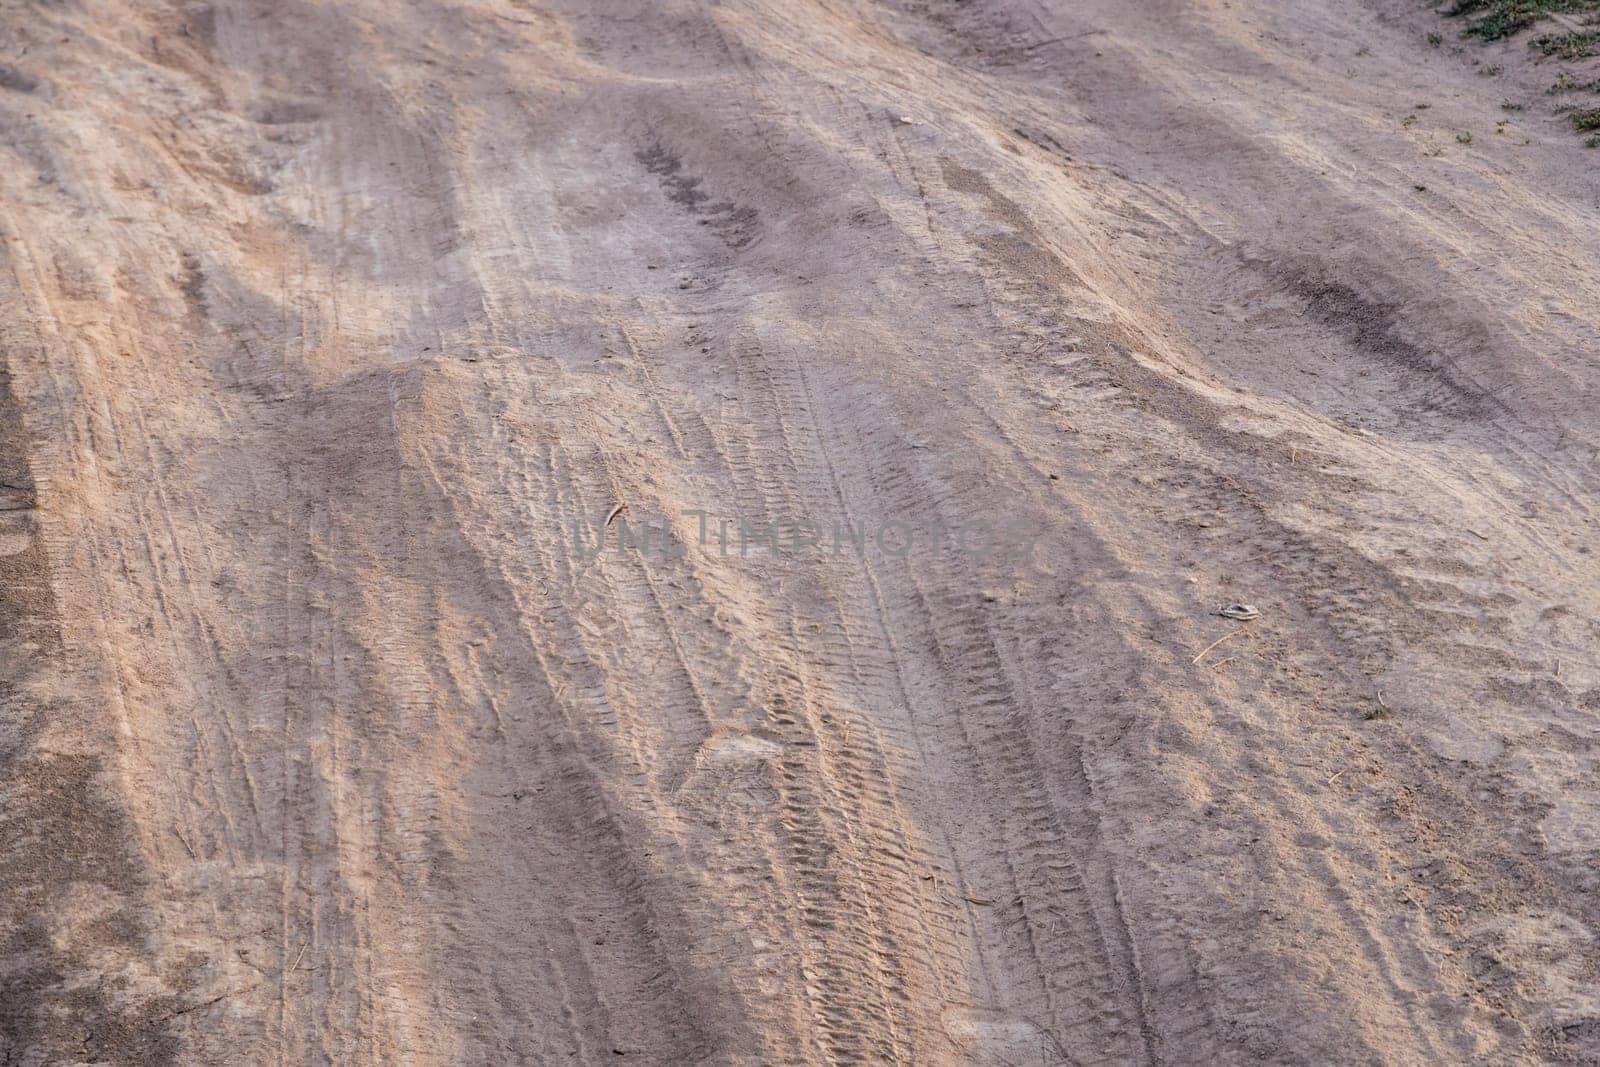 dusty dirt road at summer day, full-frame closeup view.